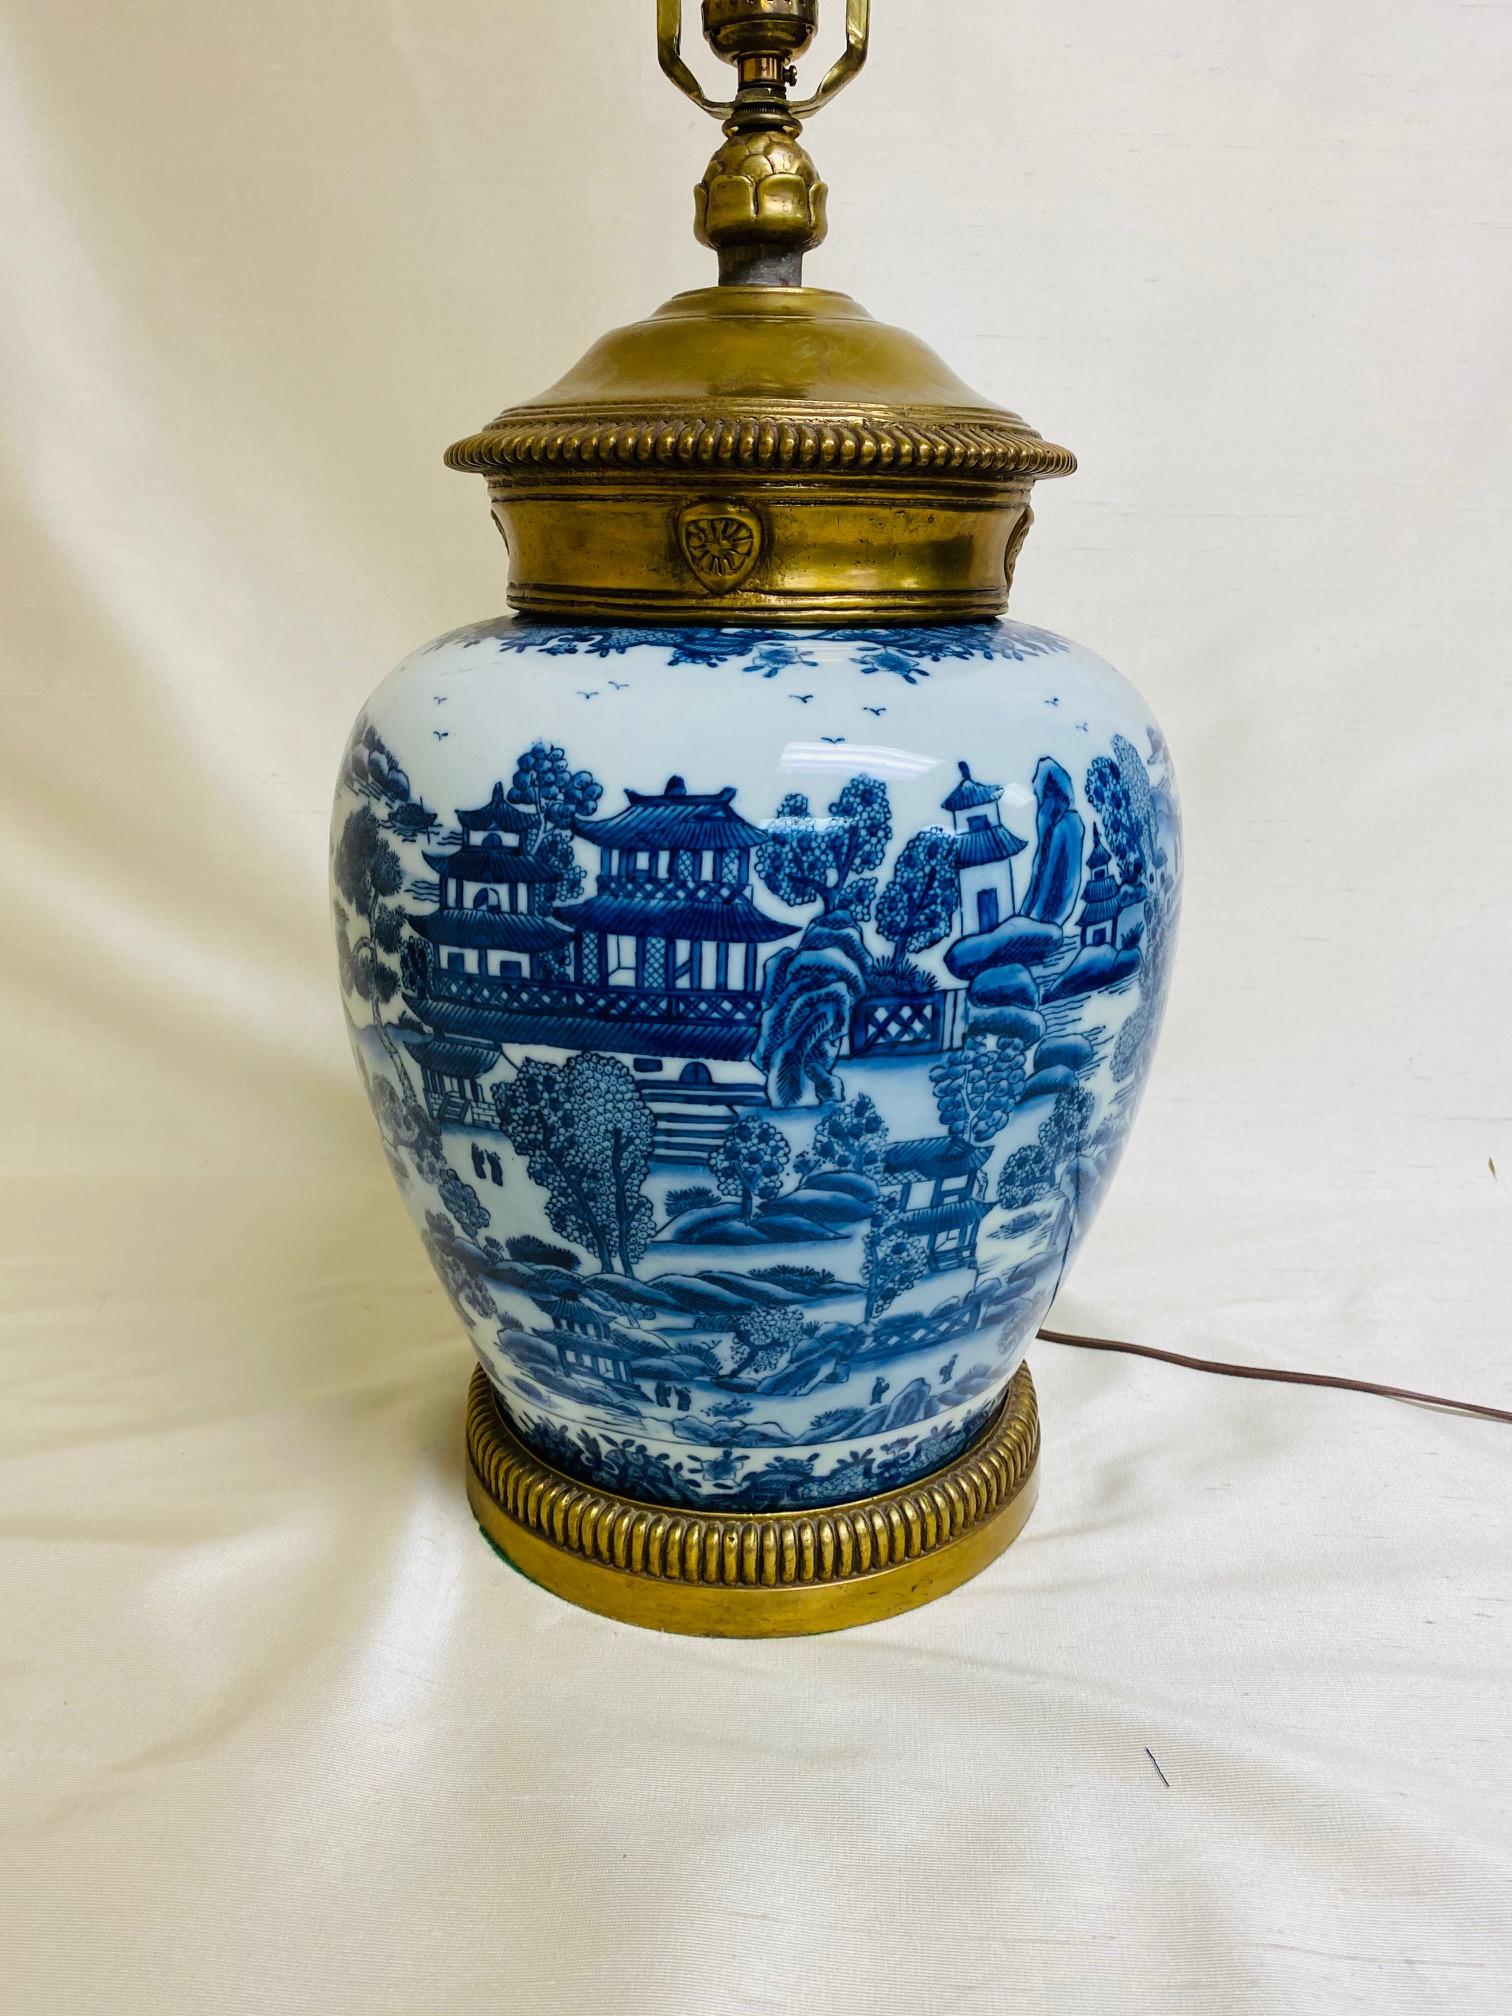 Large and Decorative Blue and White Chinese Export Vase with Ormolu Mounts as Lamp
Late 20th century
18.5